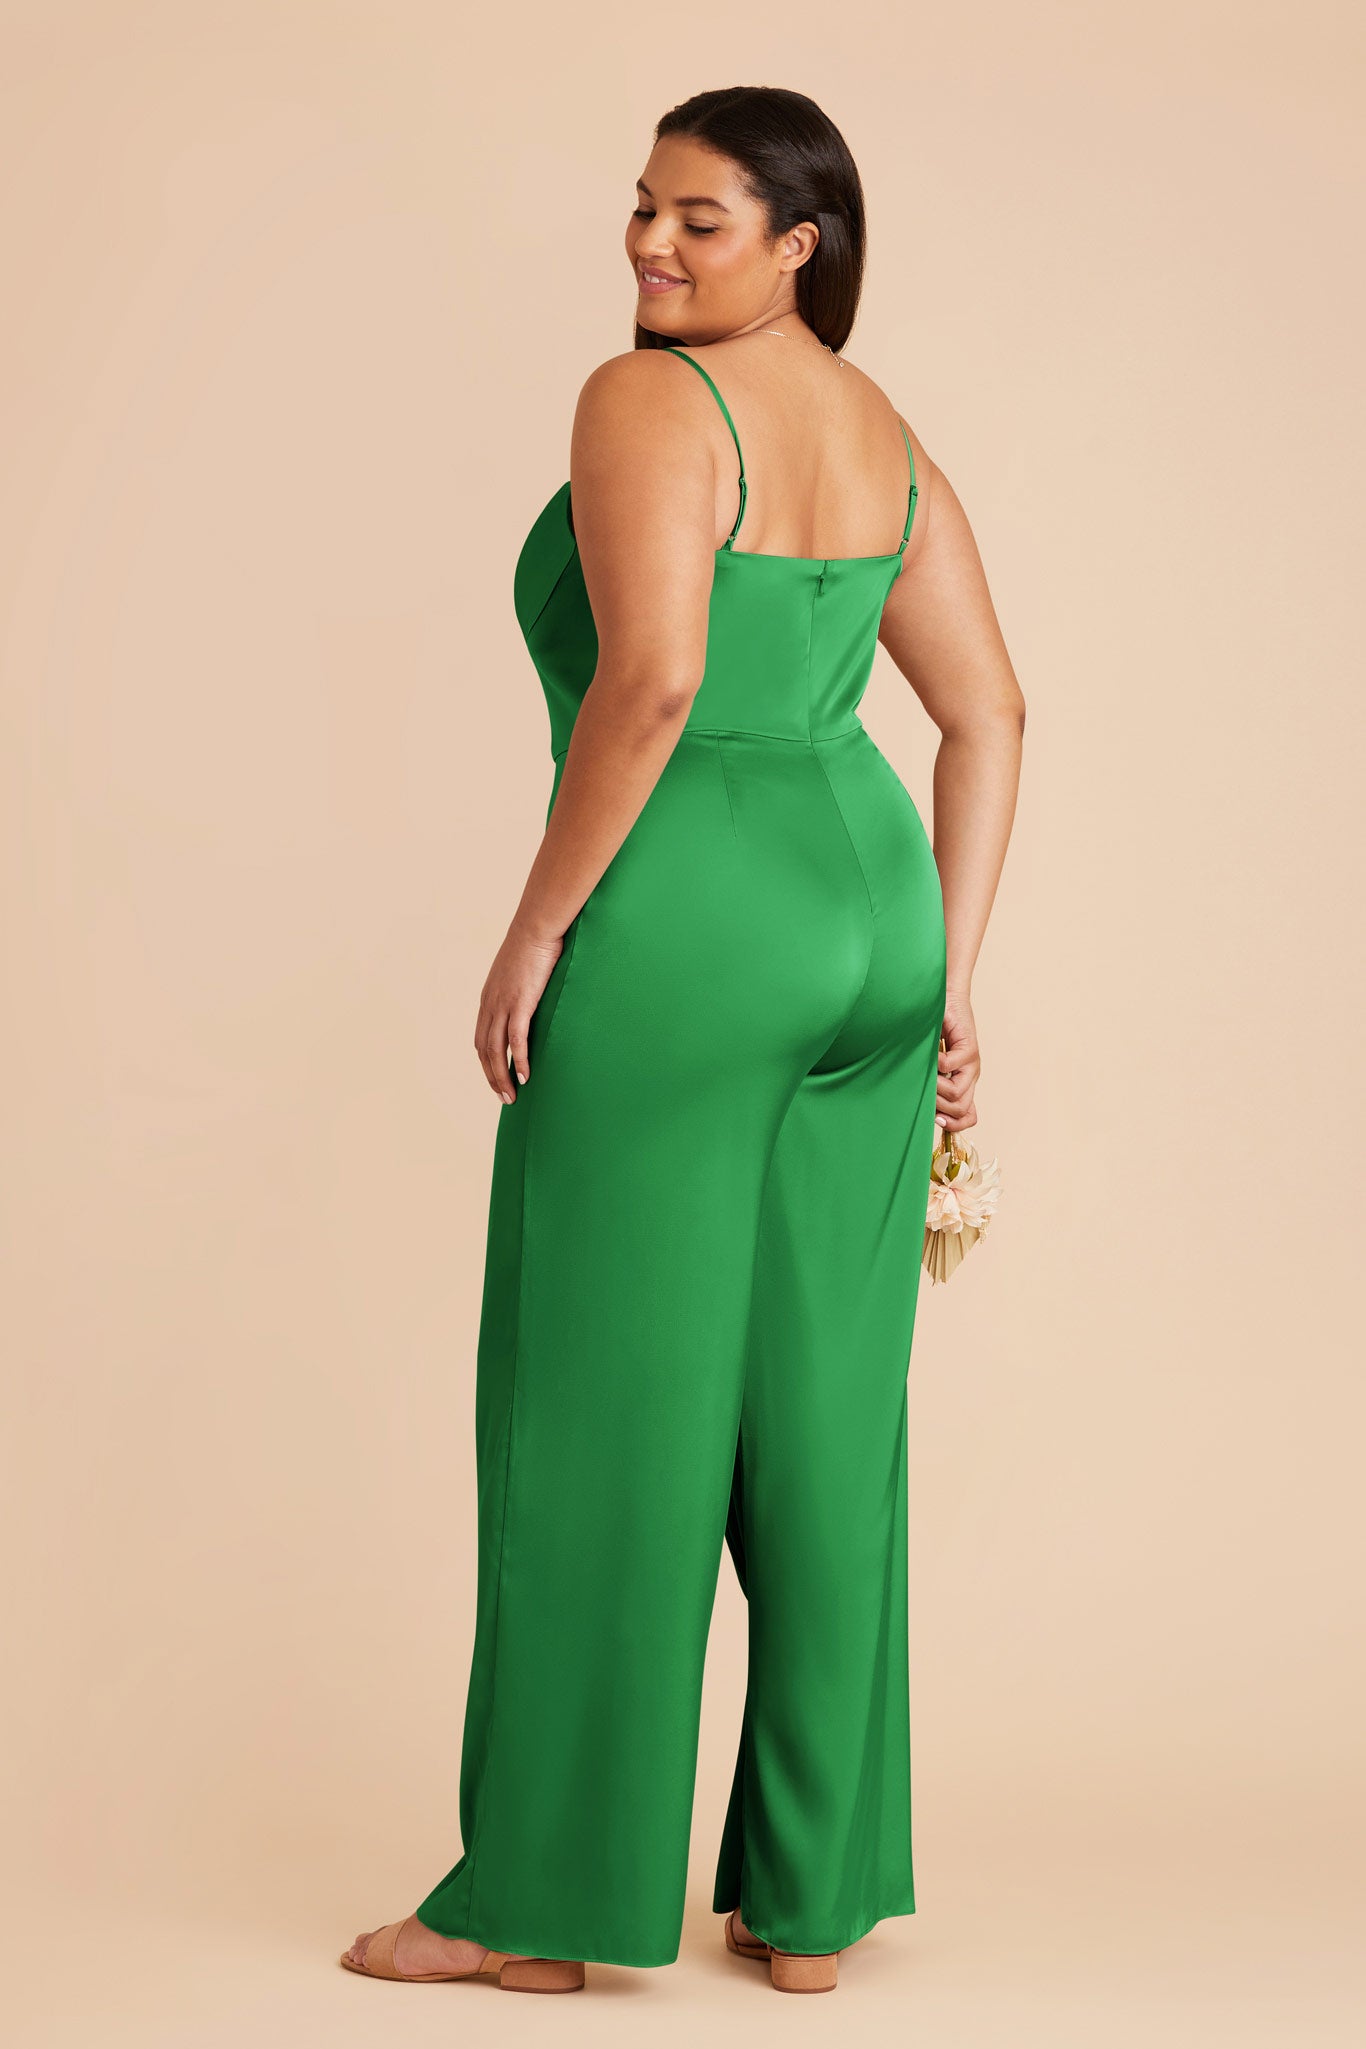 Kelly Green Donna Matte Satin Bridesmaid Jumpsuit by Birdy Grey